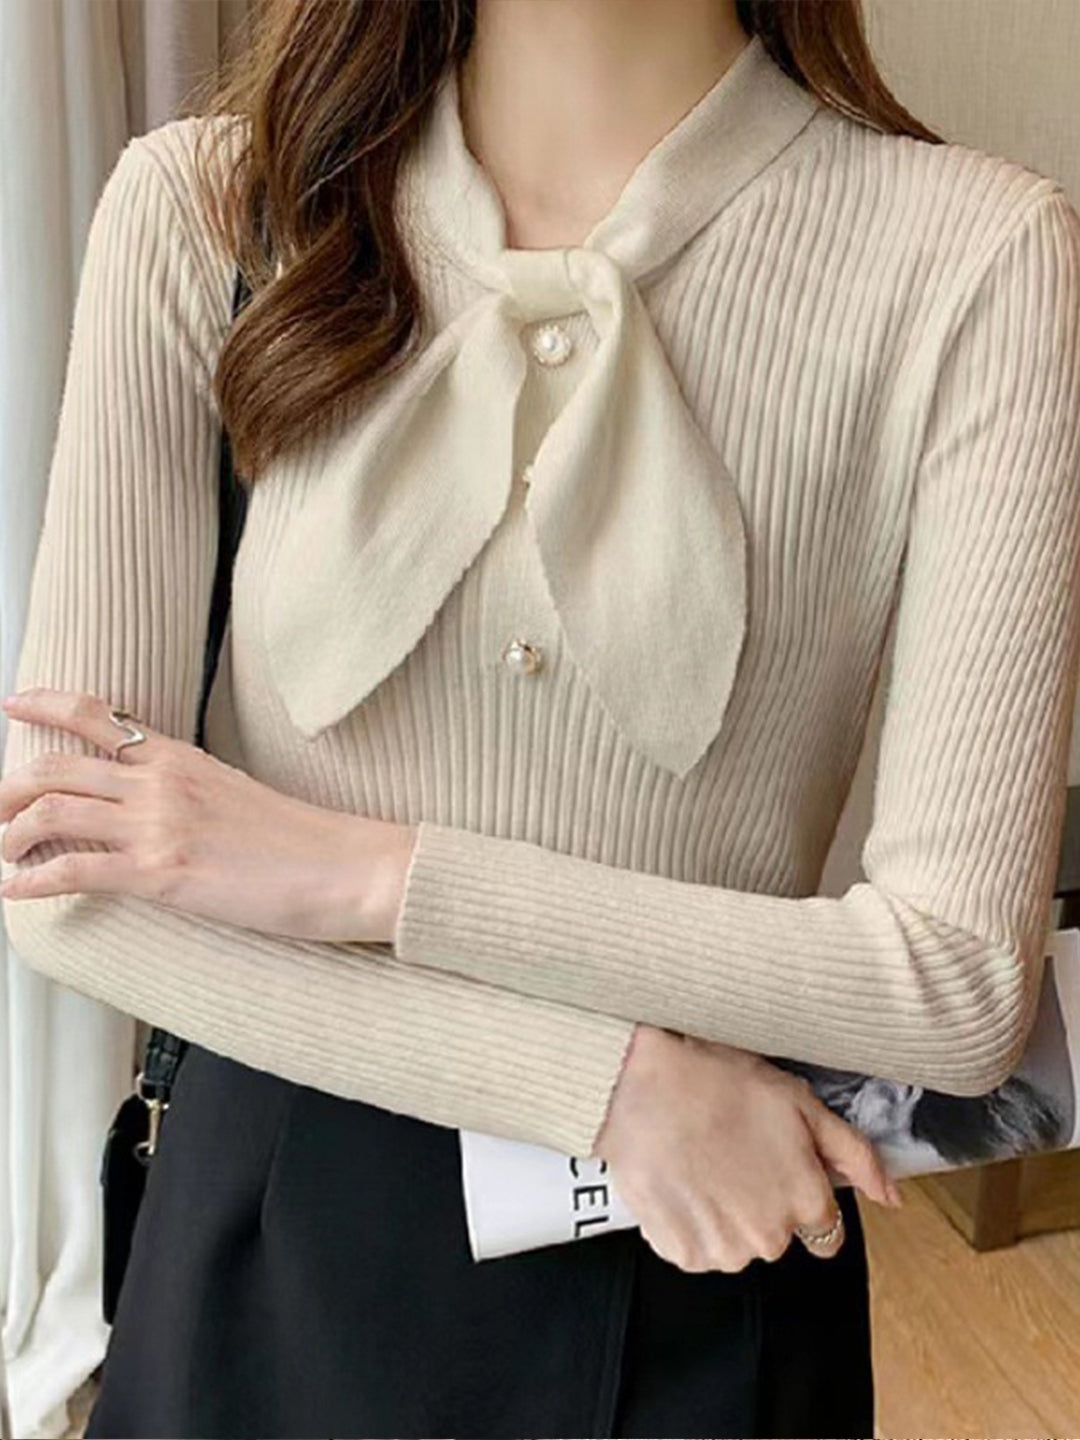 Cora Elegant Bow Tie Knitted Sweater-Apricot